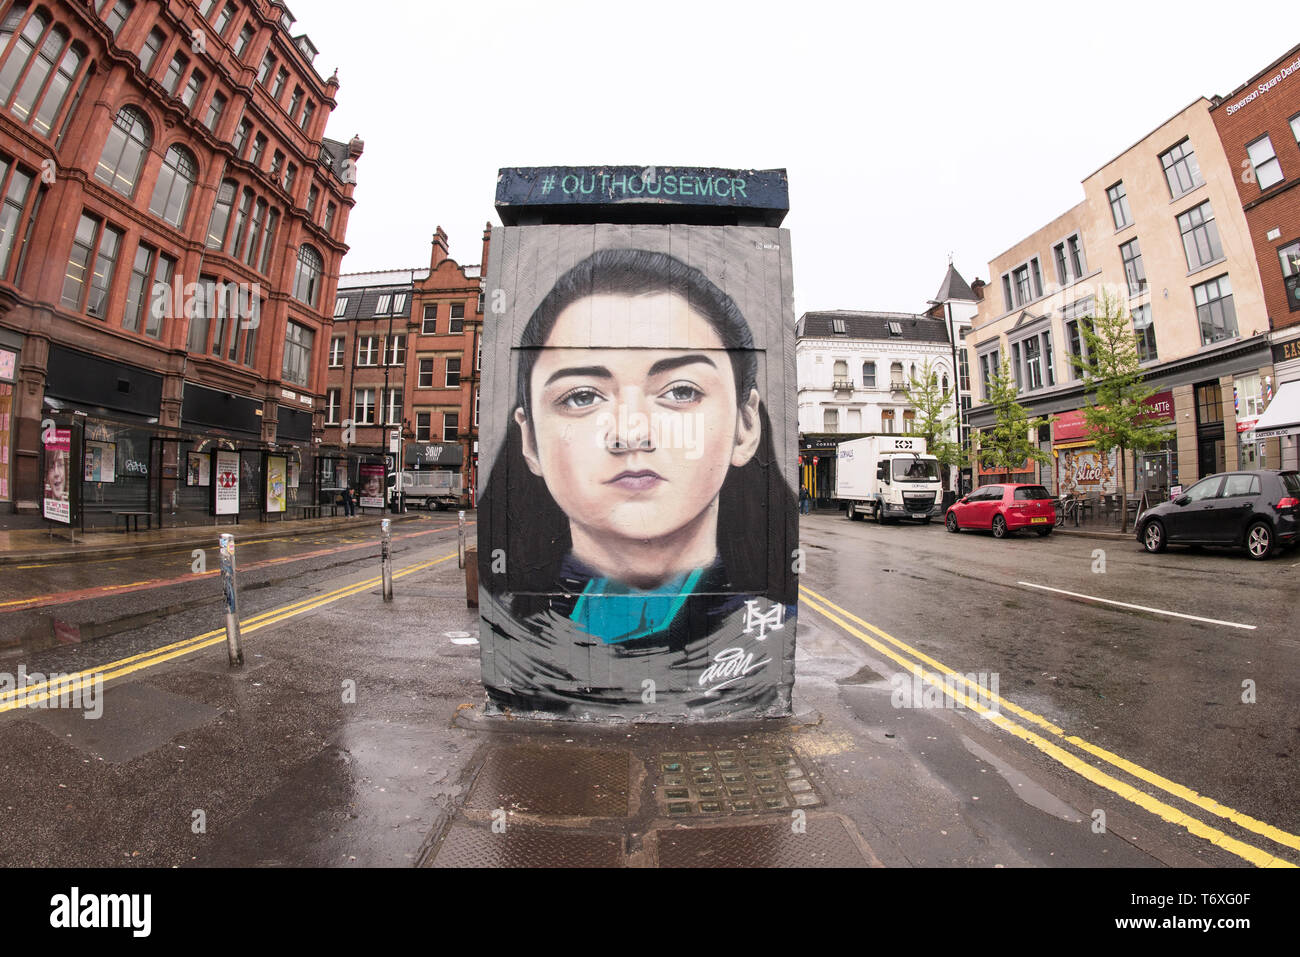 Stevenson Square, Manchester, UK. 3rd May, 2019. French born graffiti artist Akse p19's portrait of Arya Stark mural in Manchester's Northern Quarter. Arya is a character played by Maisie Williams in the popular televsion series Game of Thrones. Credit: Howard Harrison/Alamy Live News Stock Photo